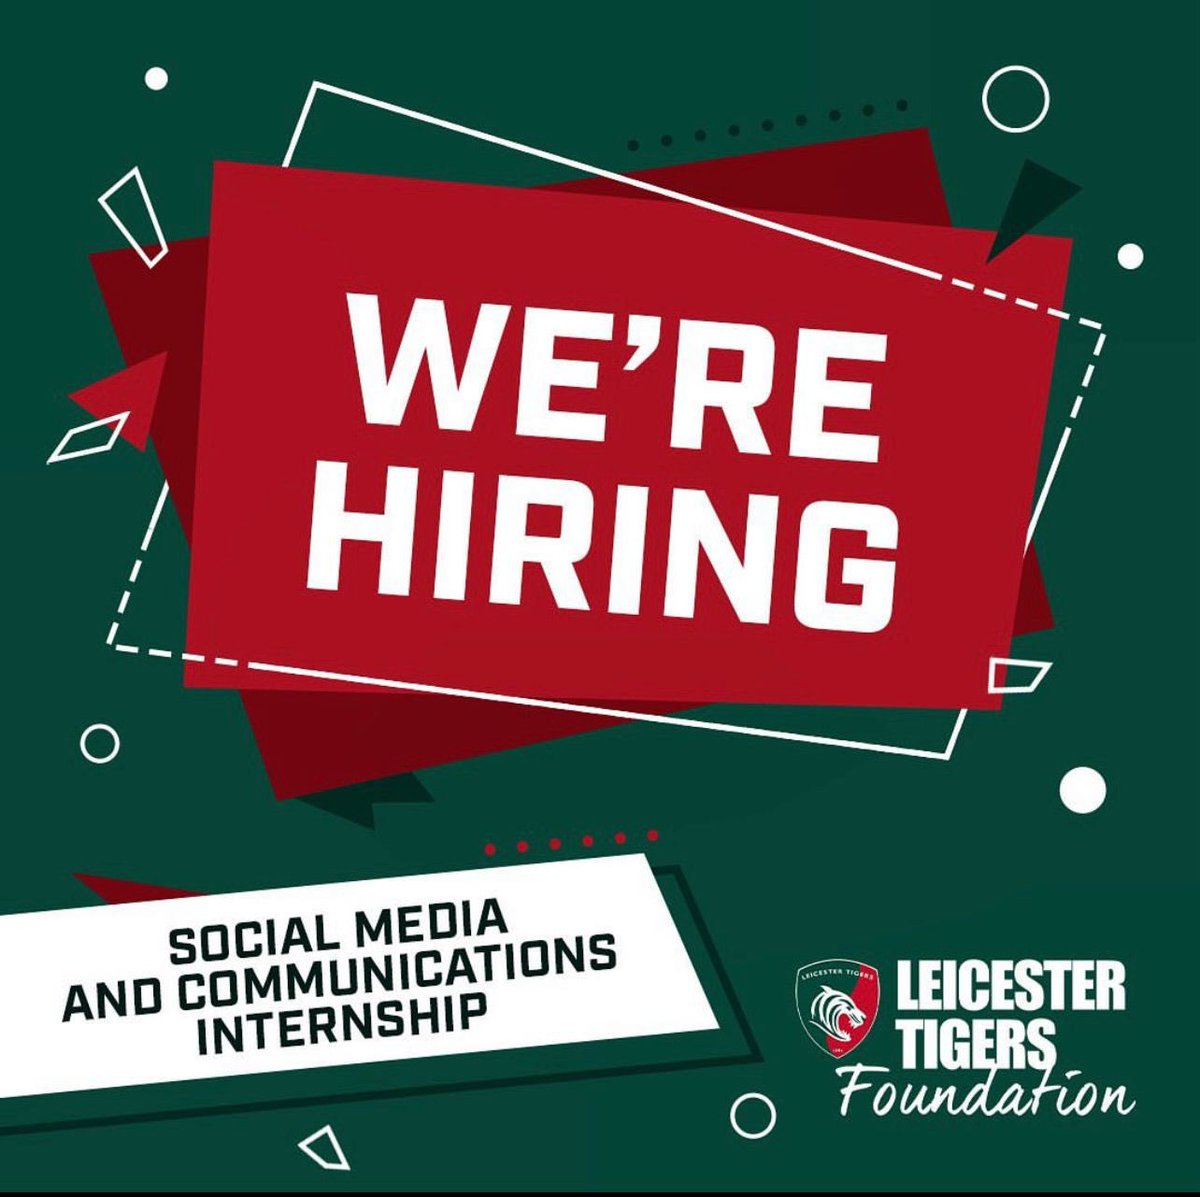 The Leicester Tigers Foundation is now accepting applications for the role as the next Social Media and Communications Placement Student! To find out more about this opportunity, please visit the link below 👇 leicestertigers.com/club/vacancies